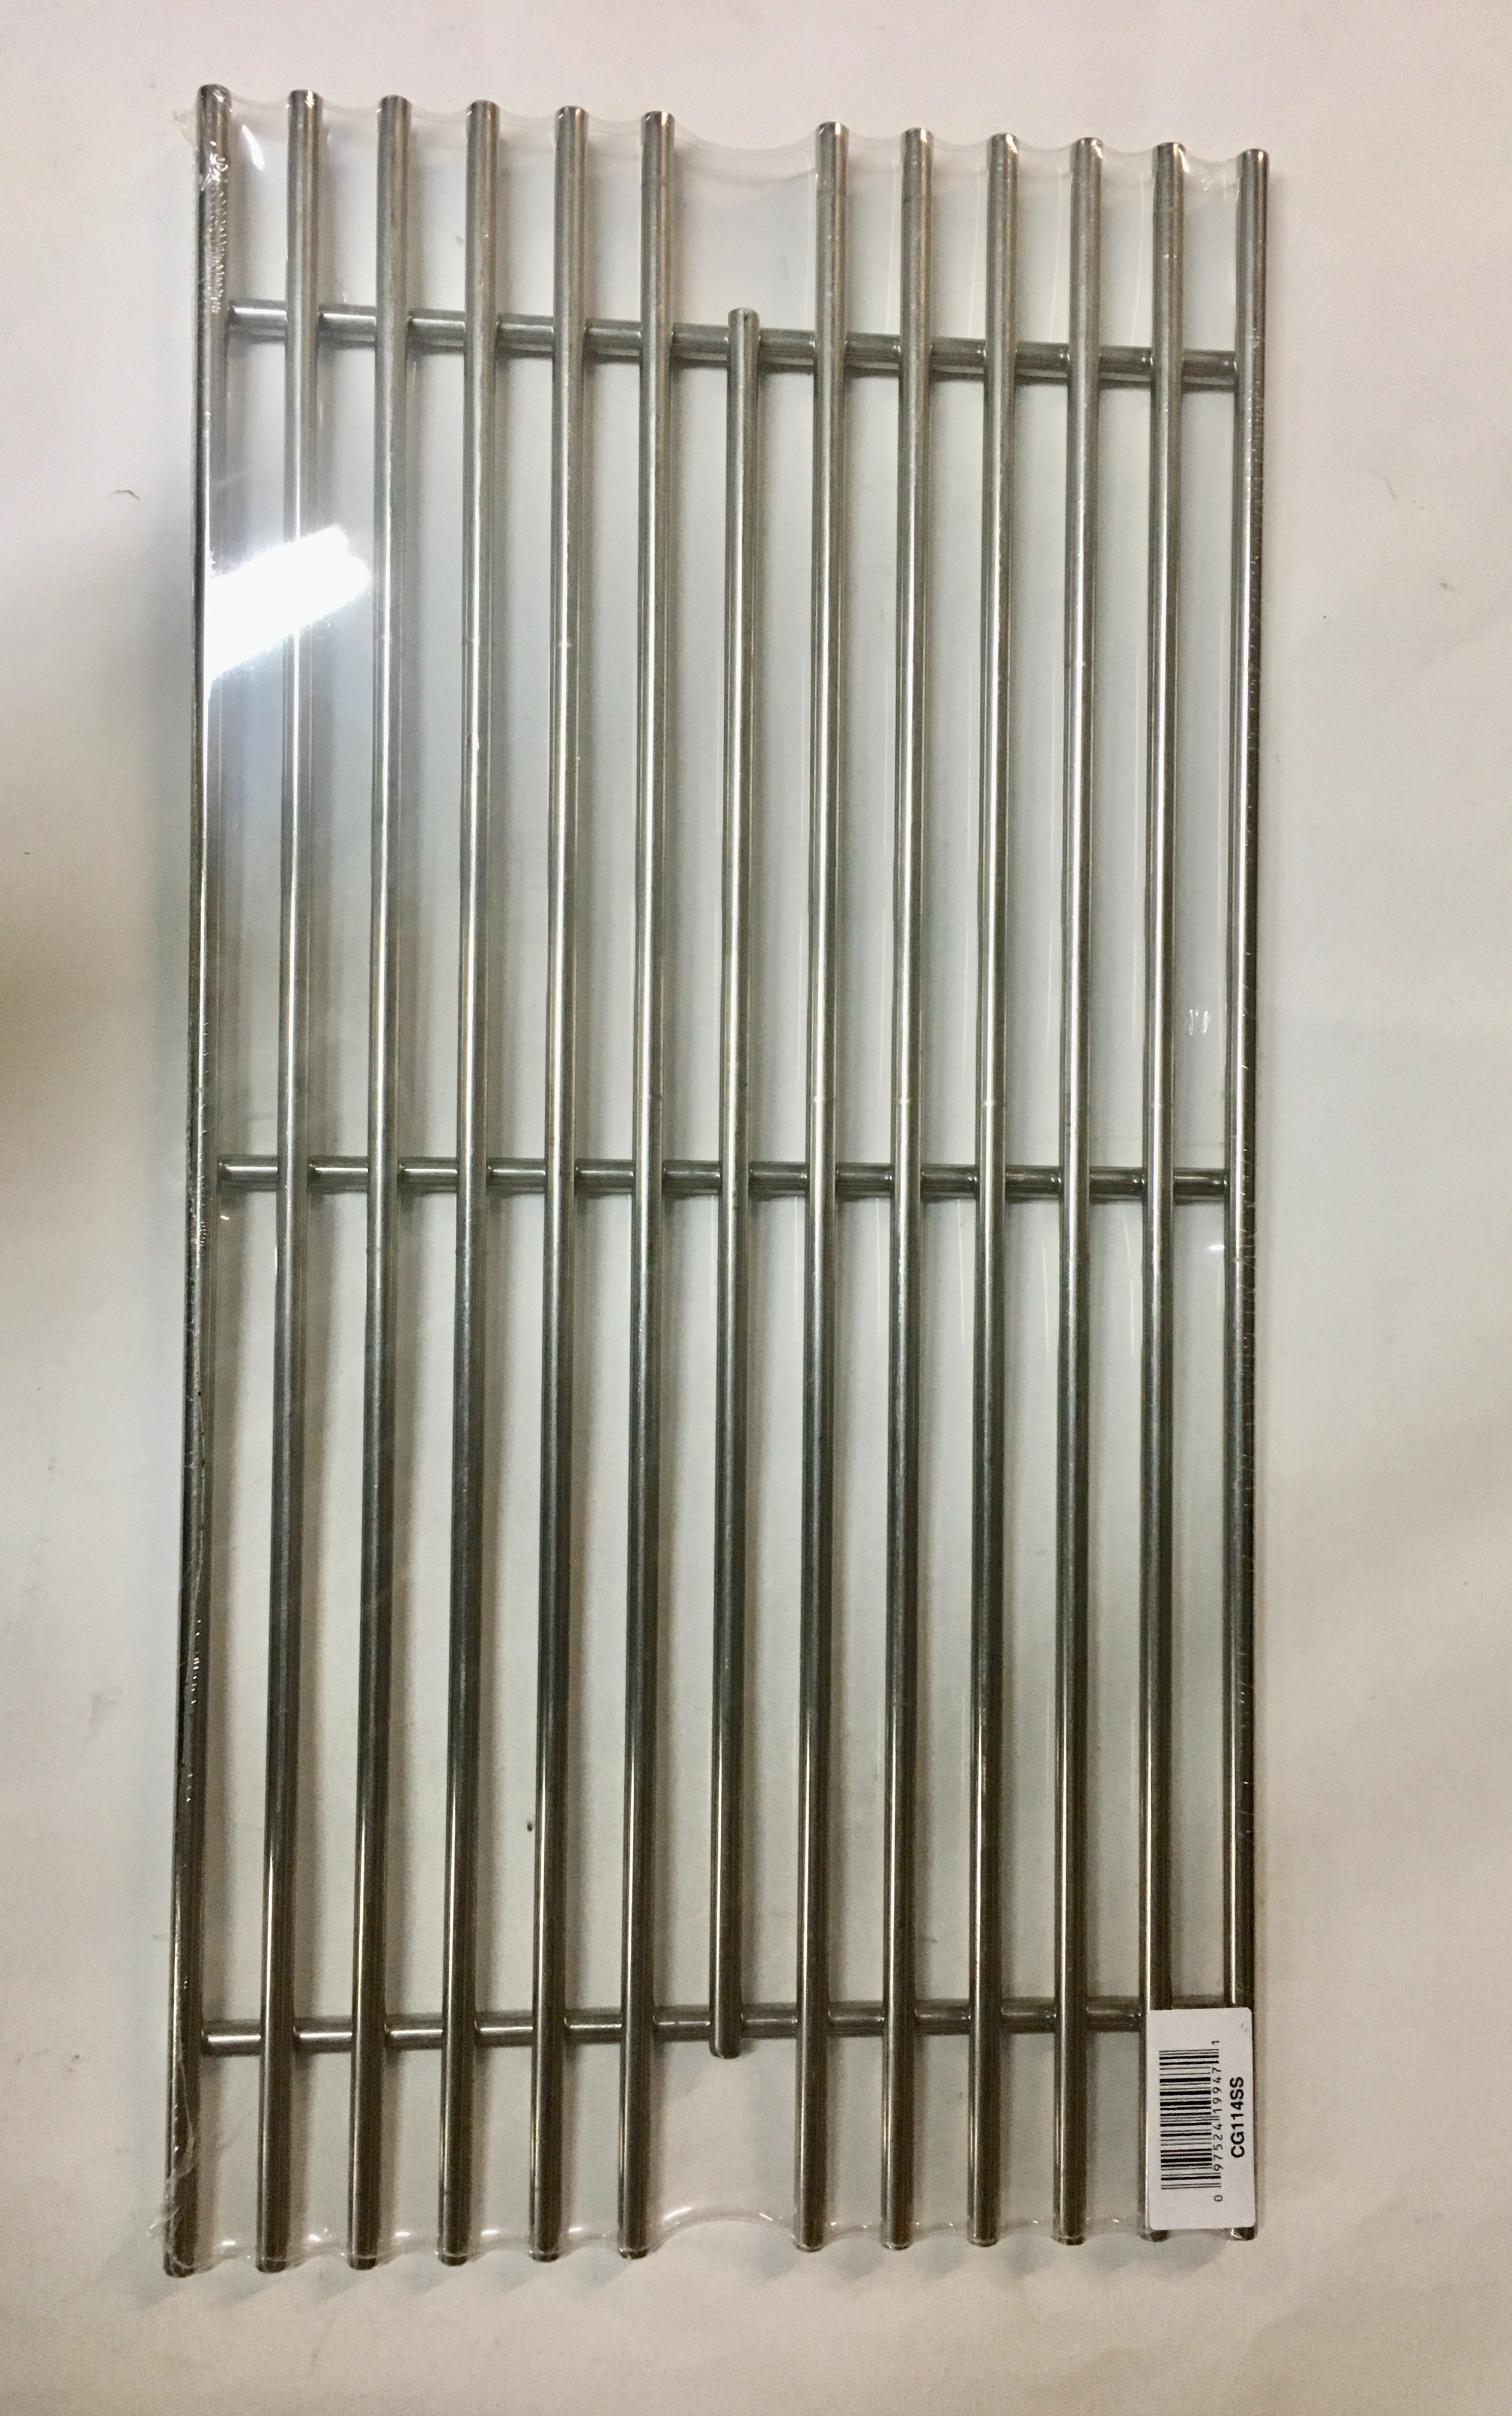 Stainless Steel Rod Cooking Grates